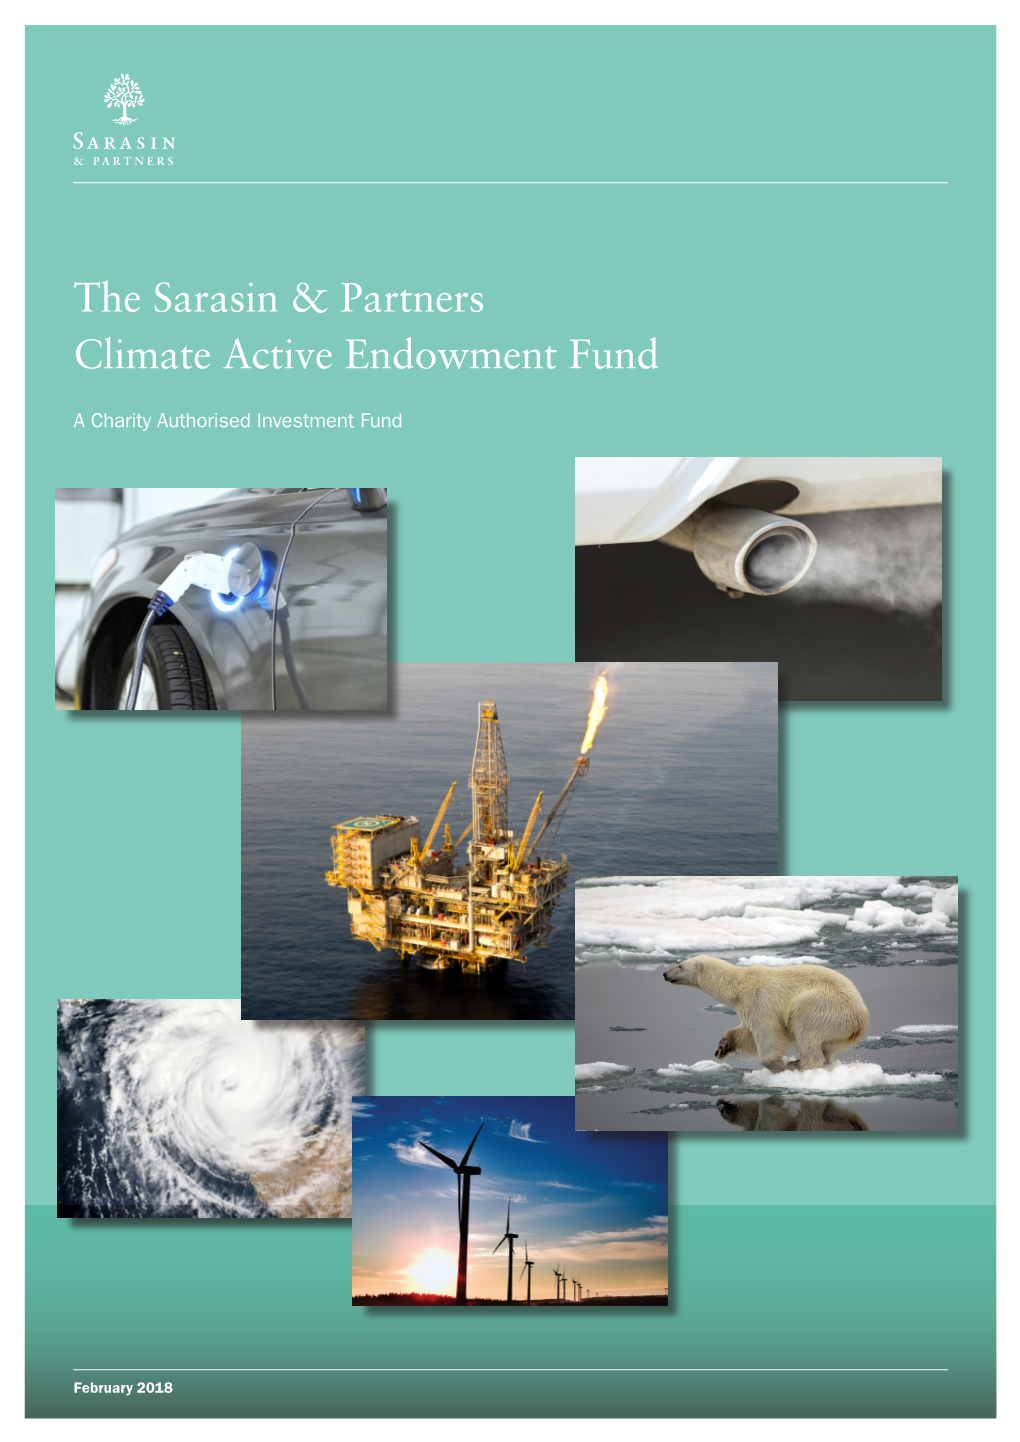 The Sarasin & Partners Climate Active Endowment Fund